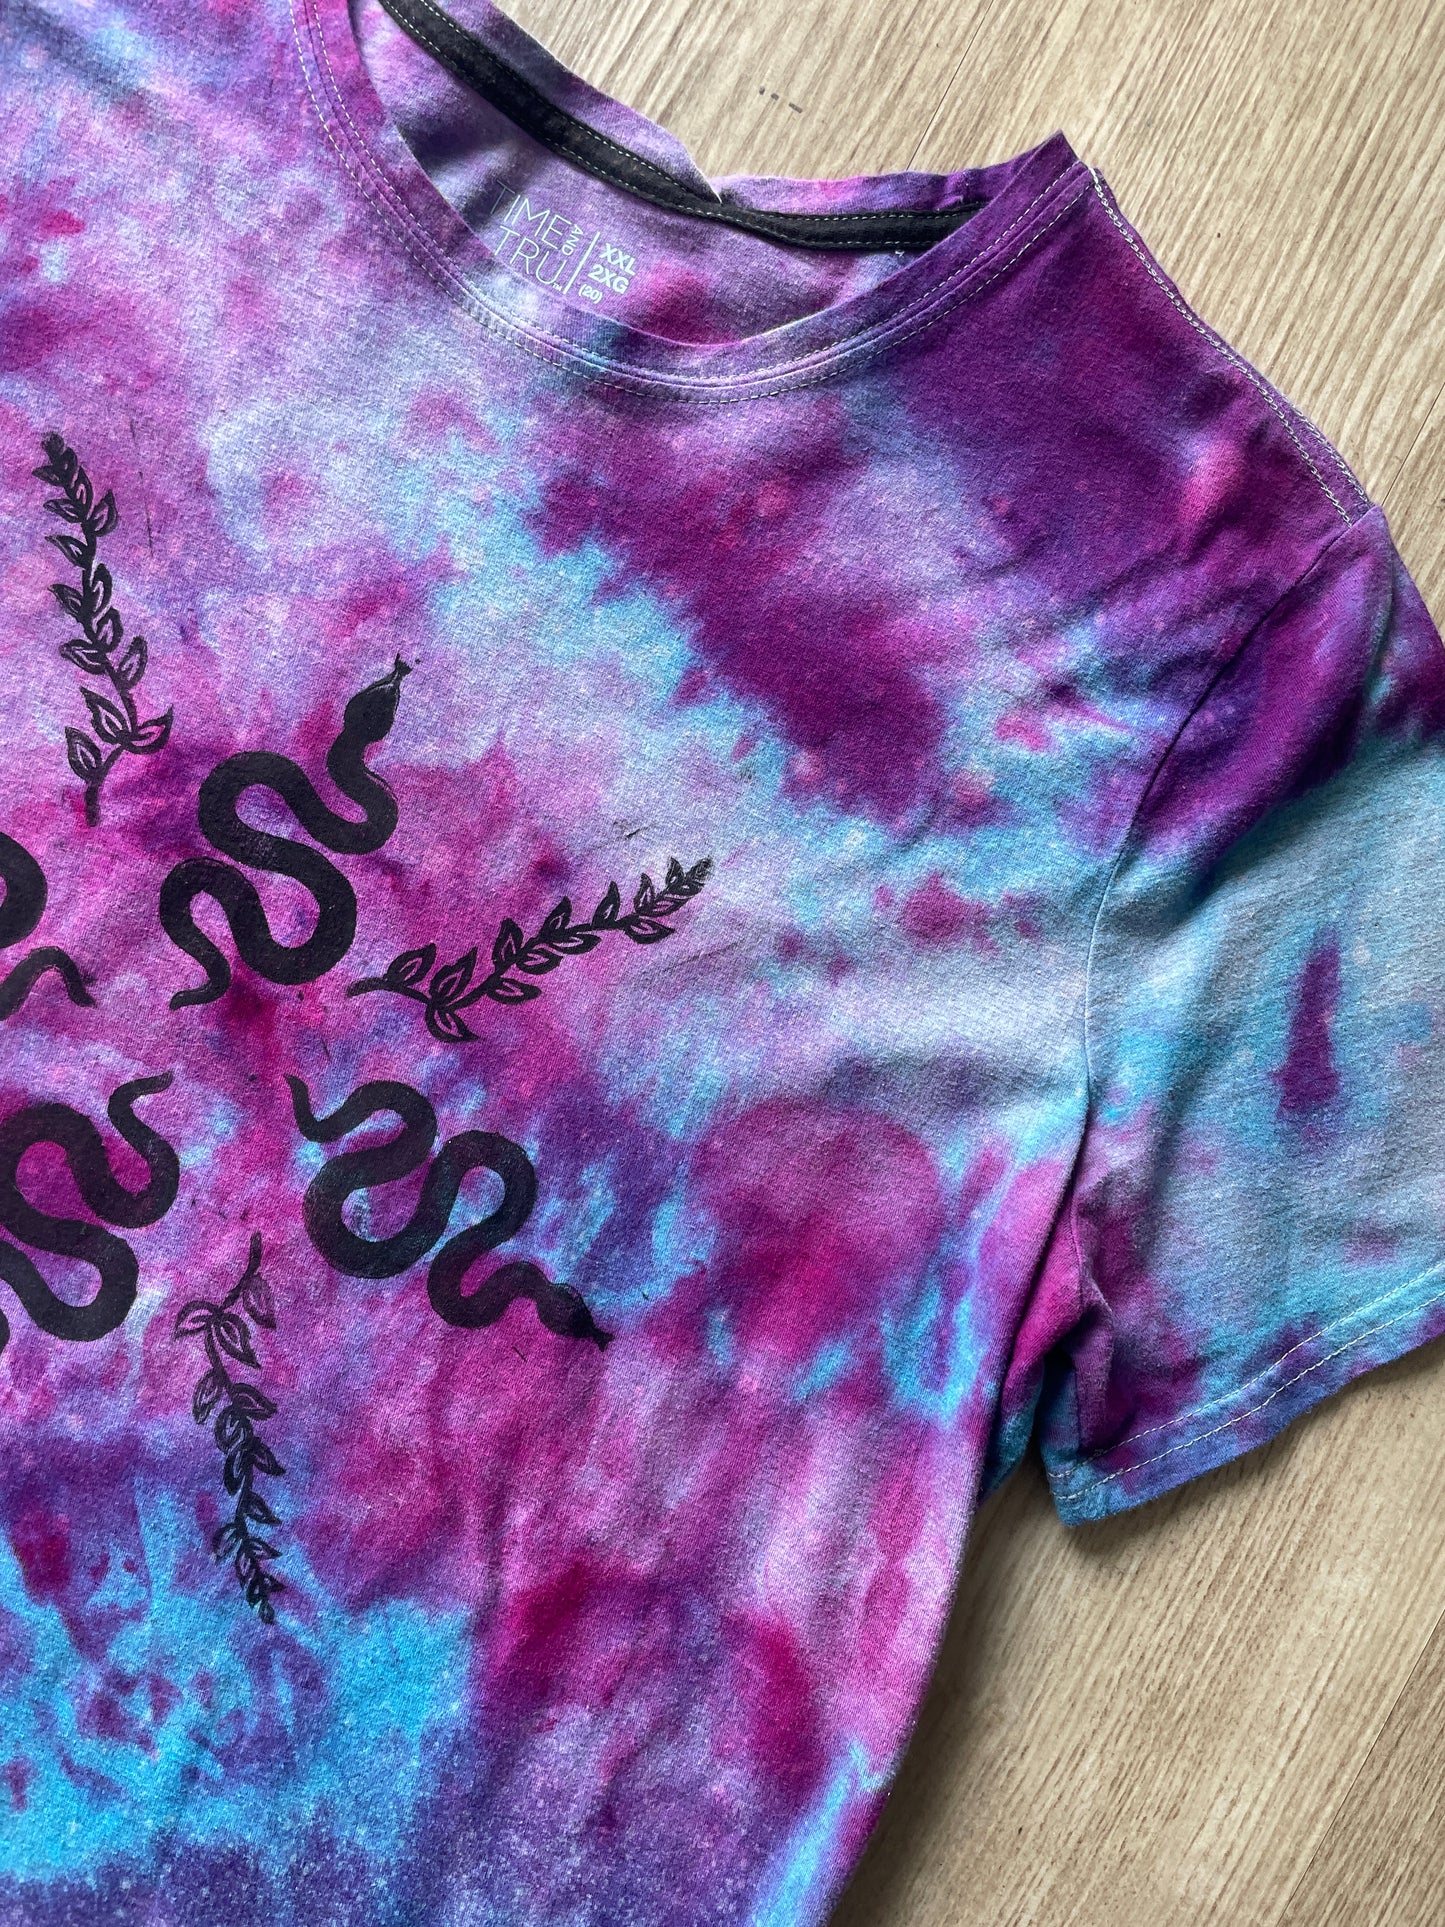 2X Juniors' Handprinted Snakes and Vines Galaxy Tie Dye Short Sleeve T-Shirt | One-Of-a-Kind Upcycled Purple, Pink, and Blue Ice Dye Top